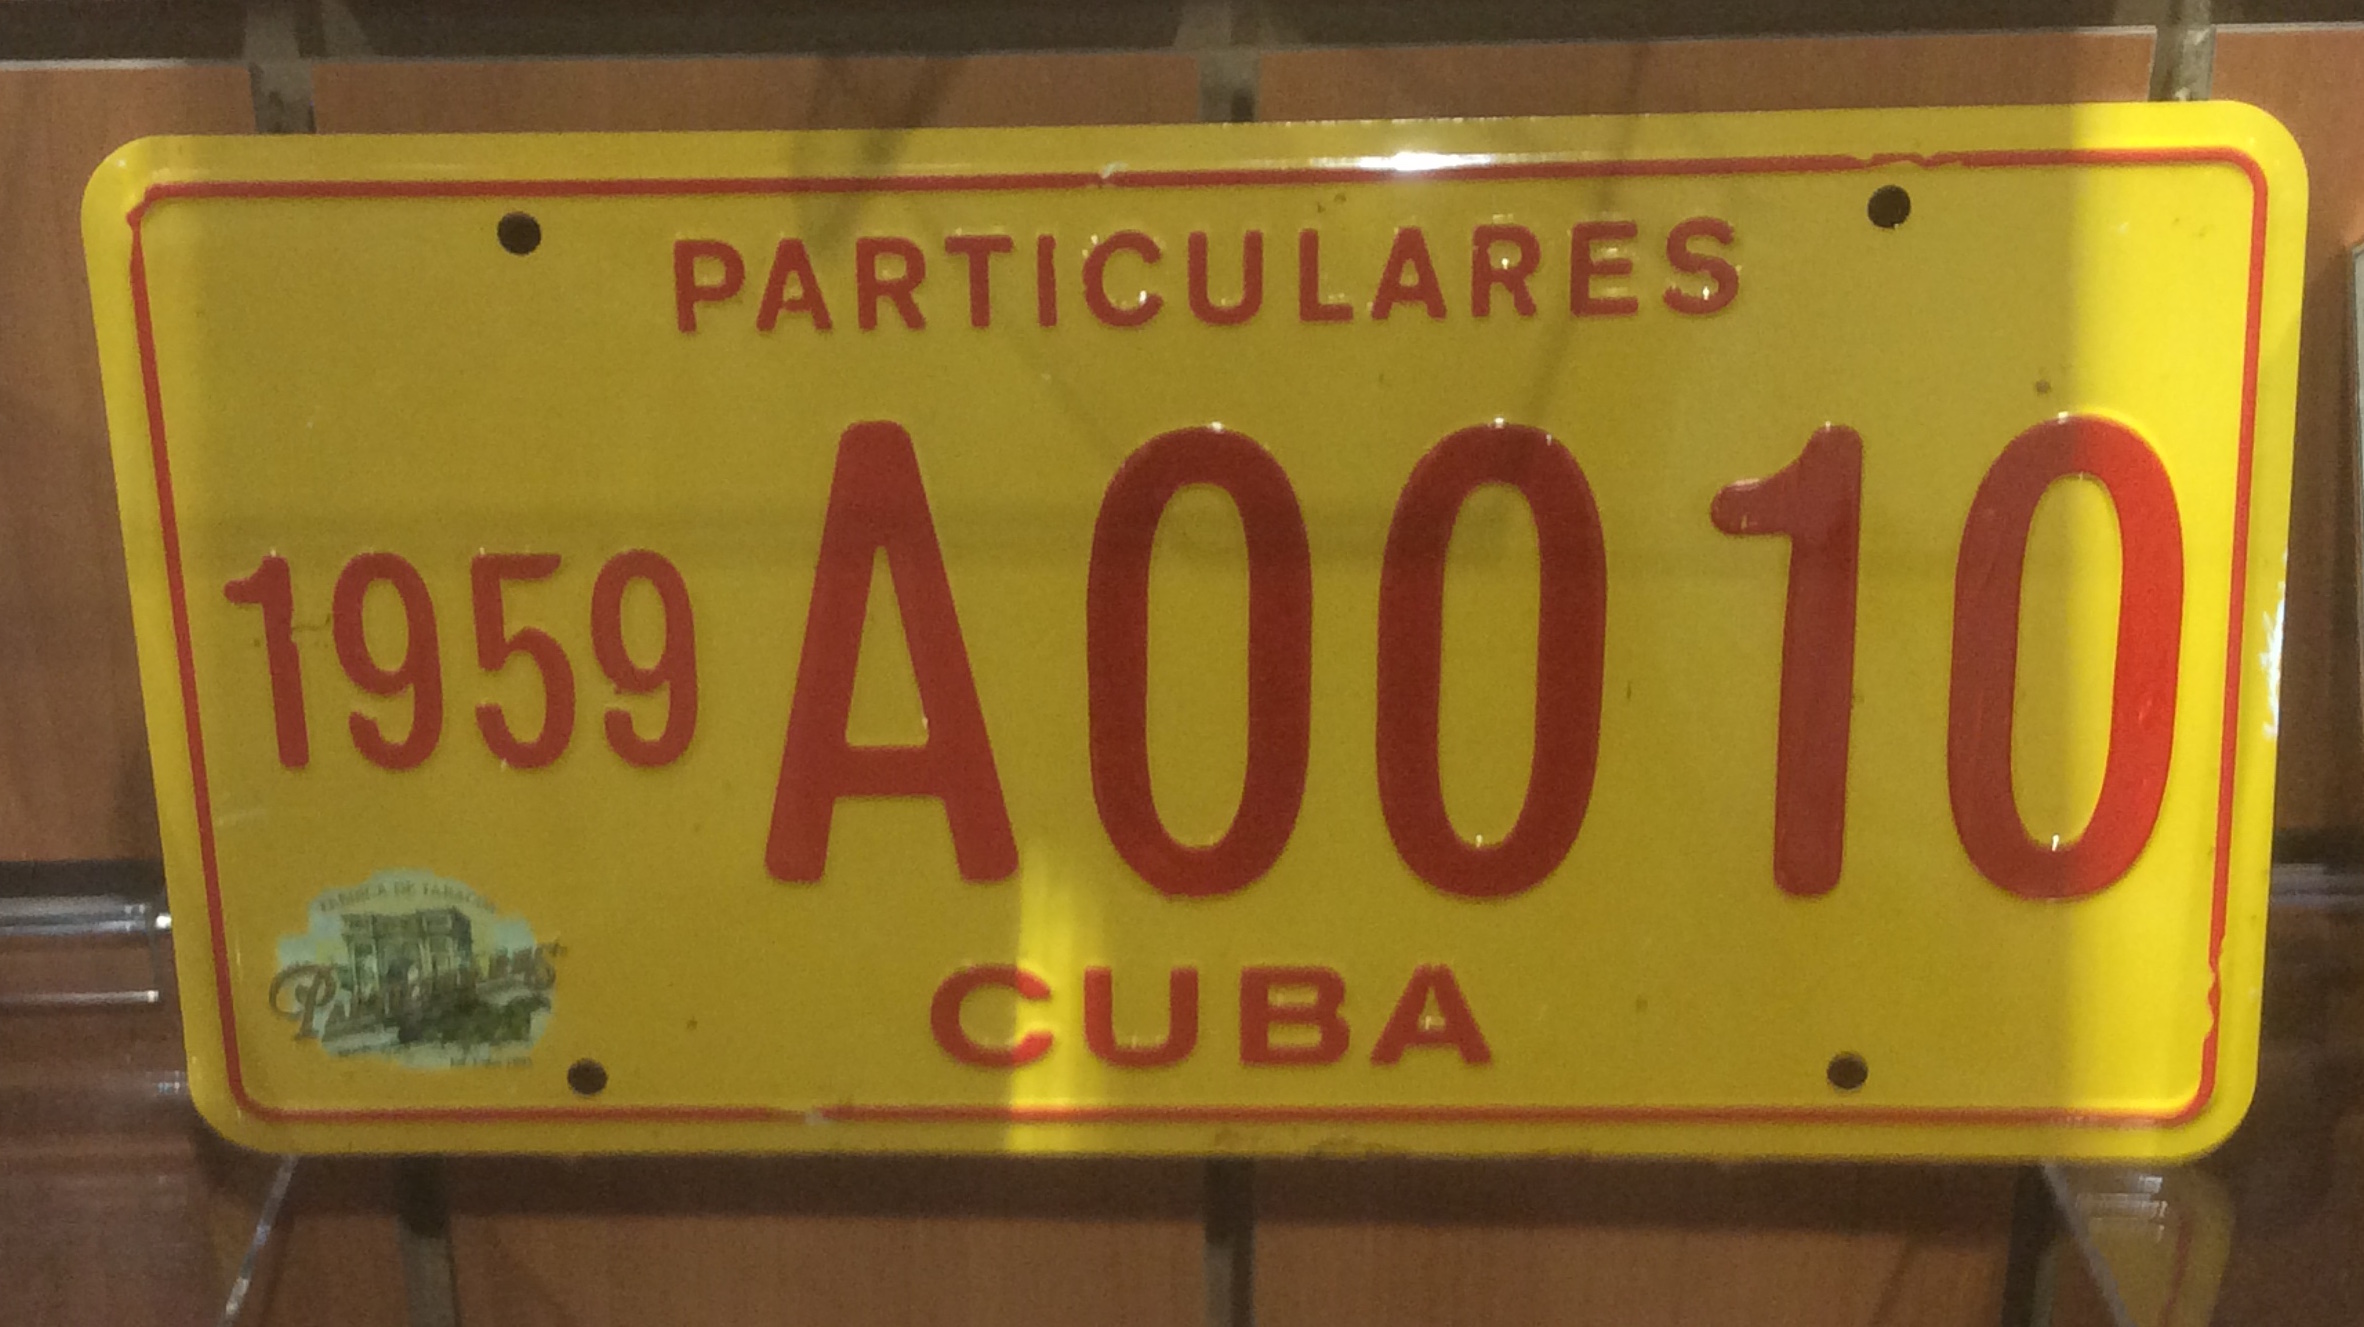 Particulares License Plate